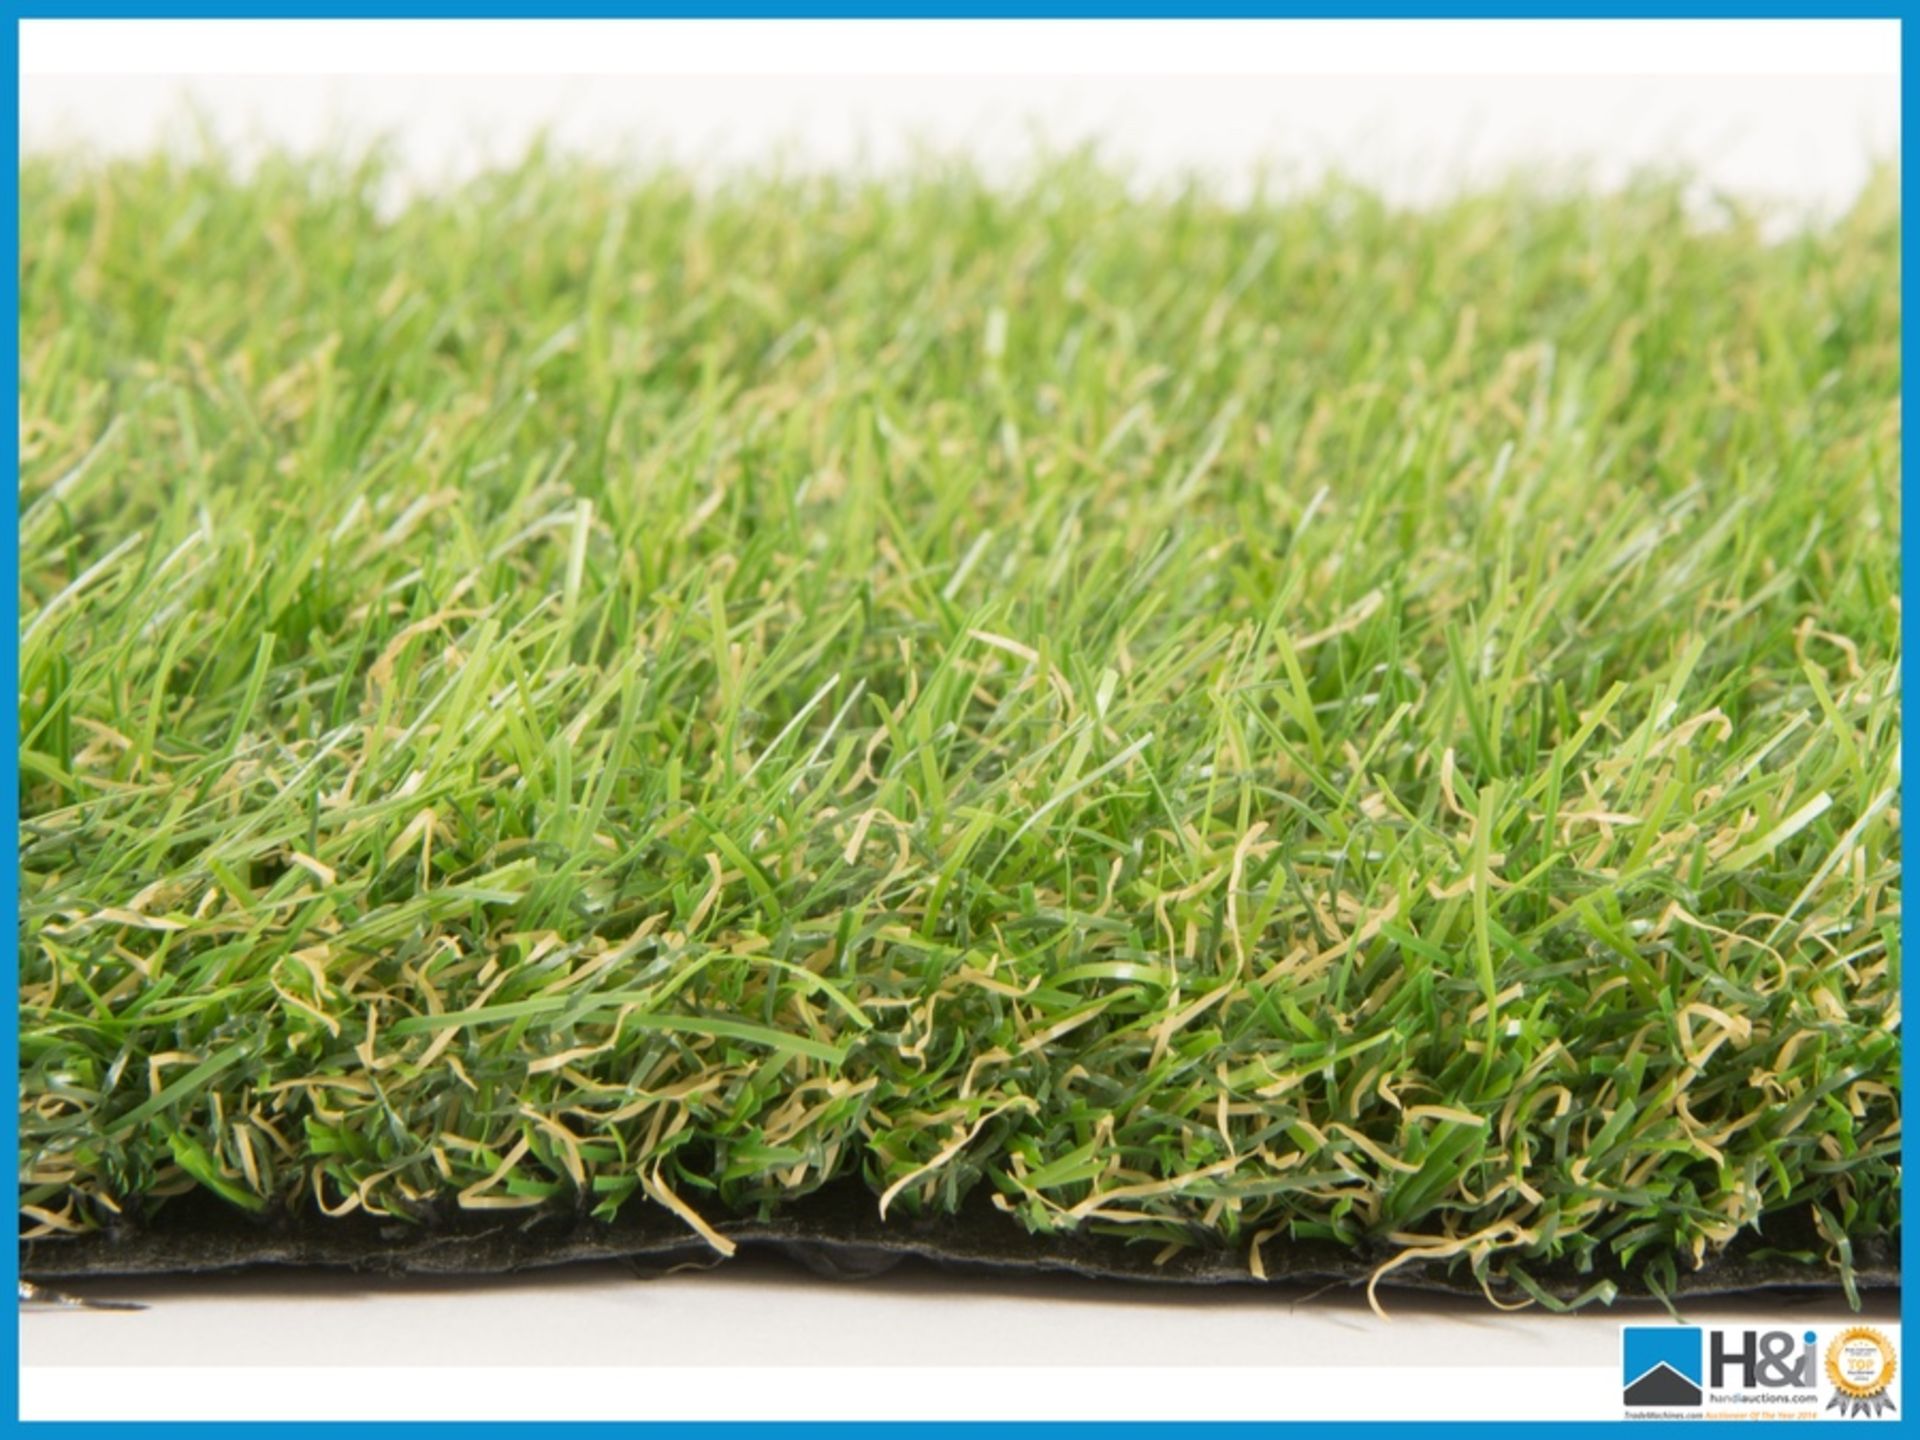 Ultra high-quality 'County' artificial grass. Useage applications, commercial and domestic, - Bild 2 aus 4